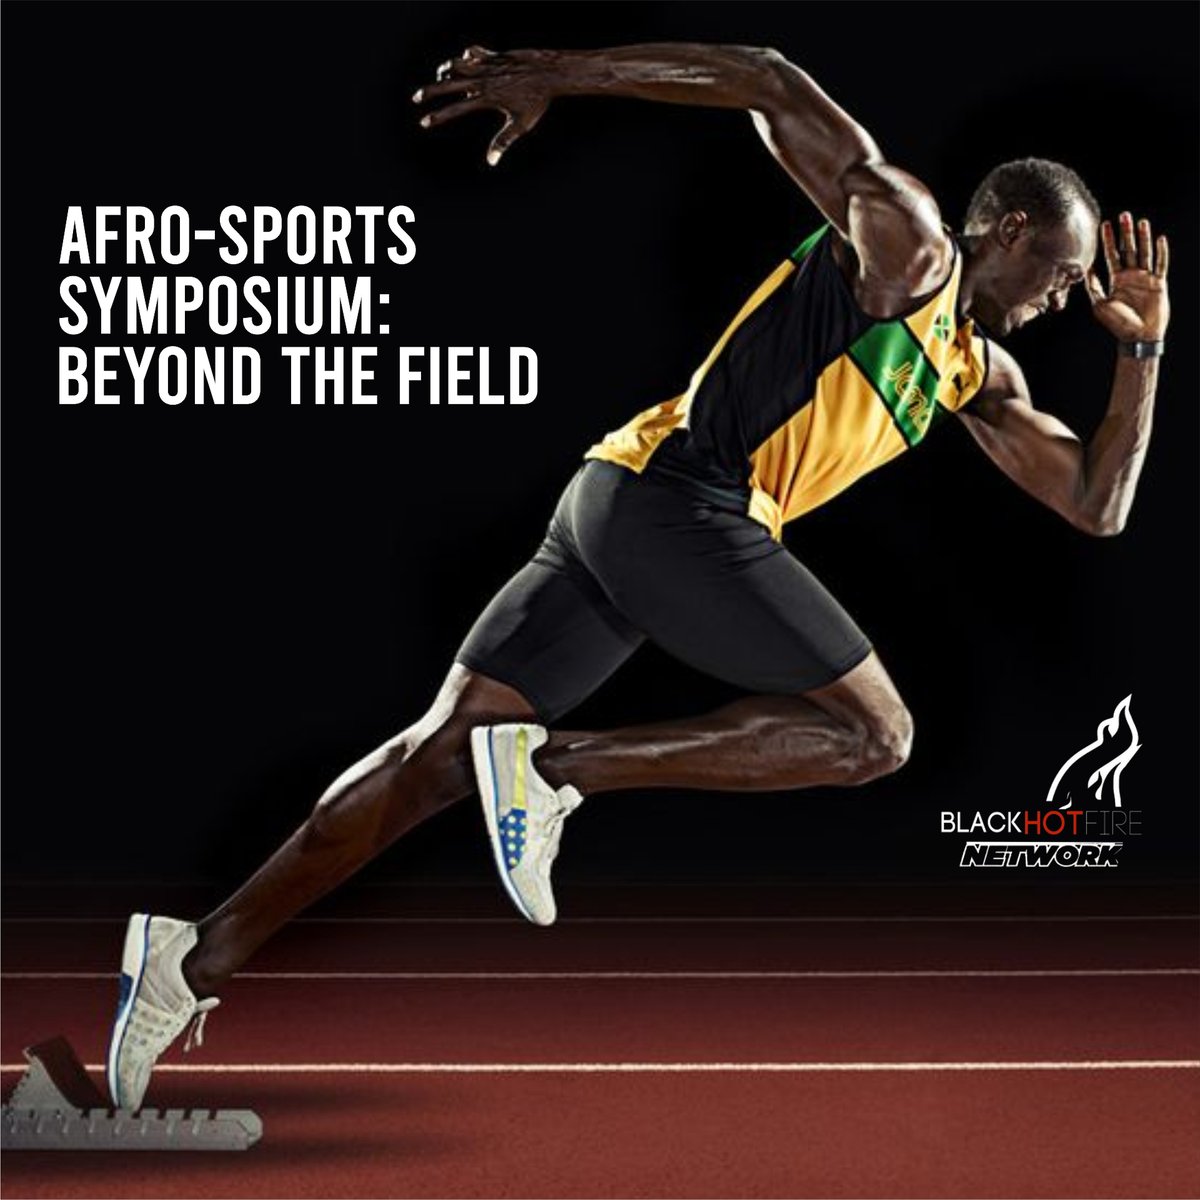 Join us for a symposium exploring the cultural significance of sports in Africa on our podcast. Tune in for discussions on sports history, fandom culture, and the transformative power of athletics in shaping identity and community.
--
🌐 blackhotfirenetwork.com

#africansports